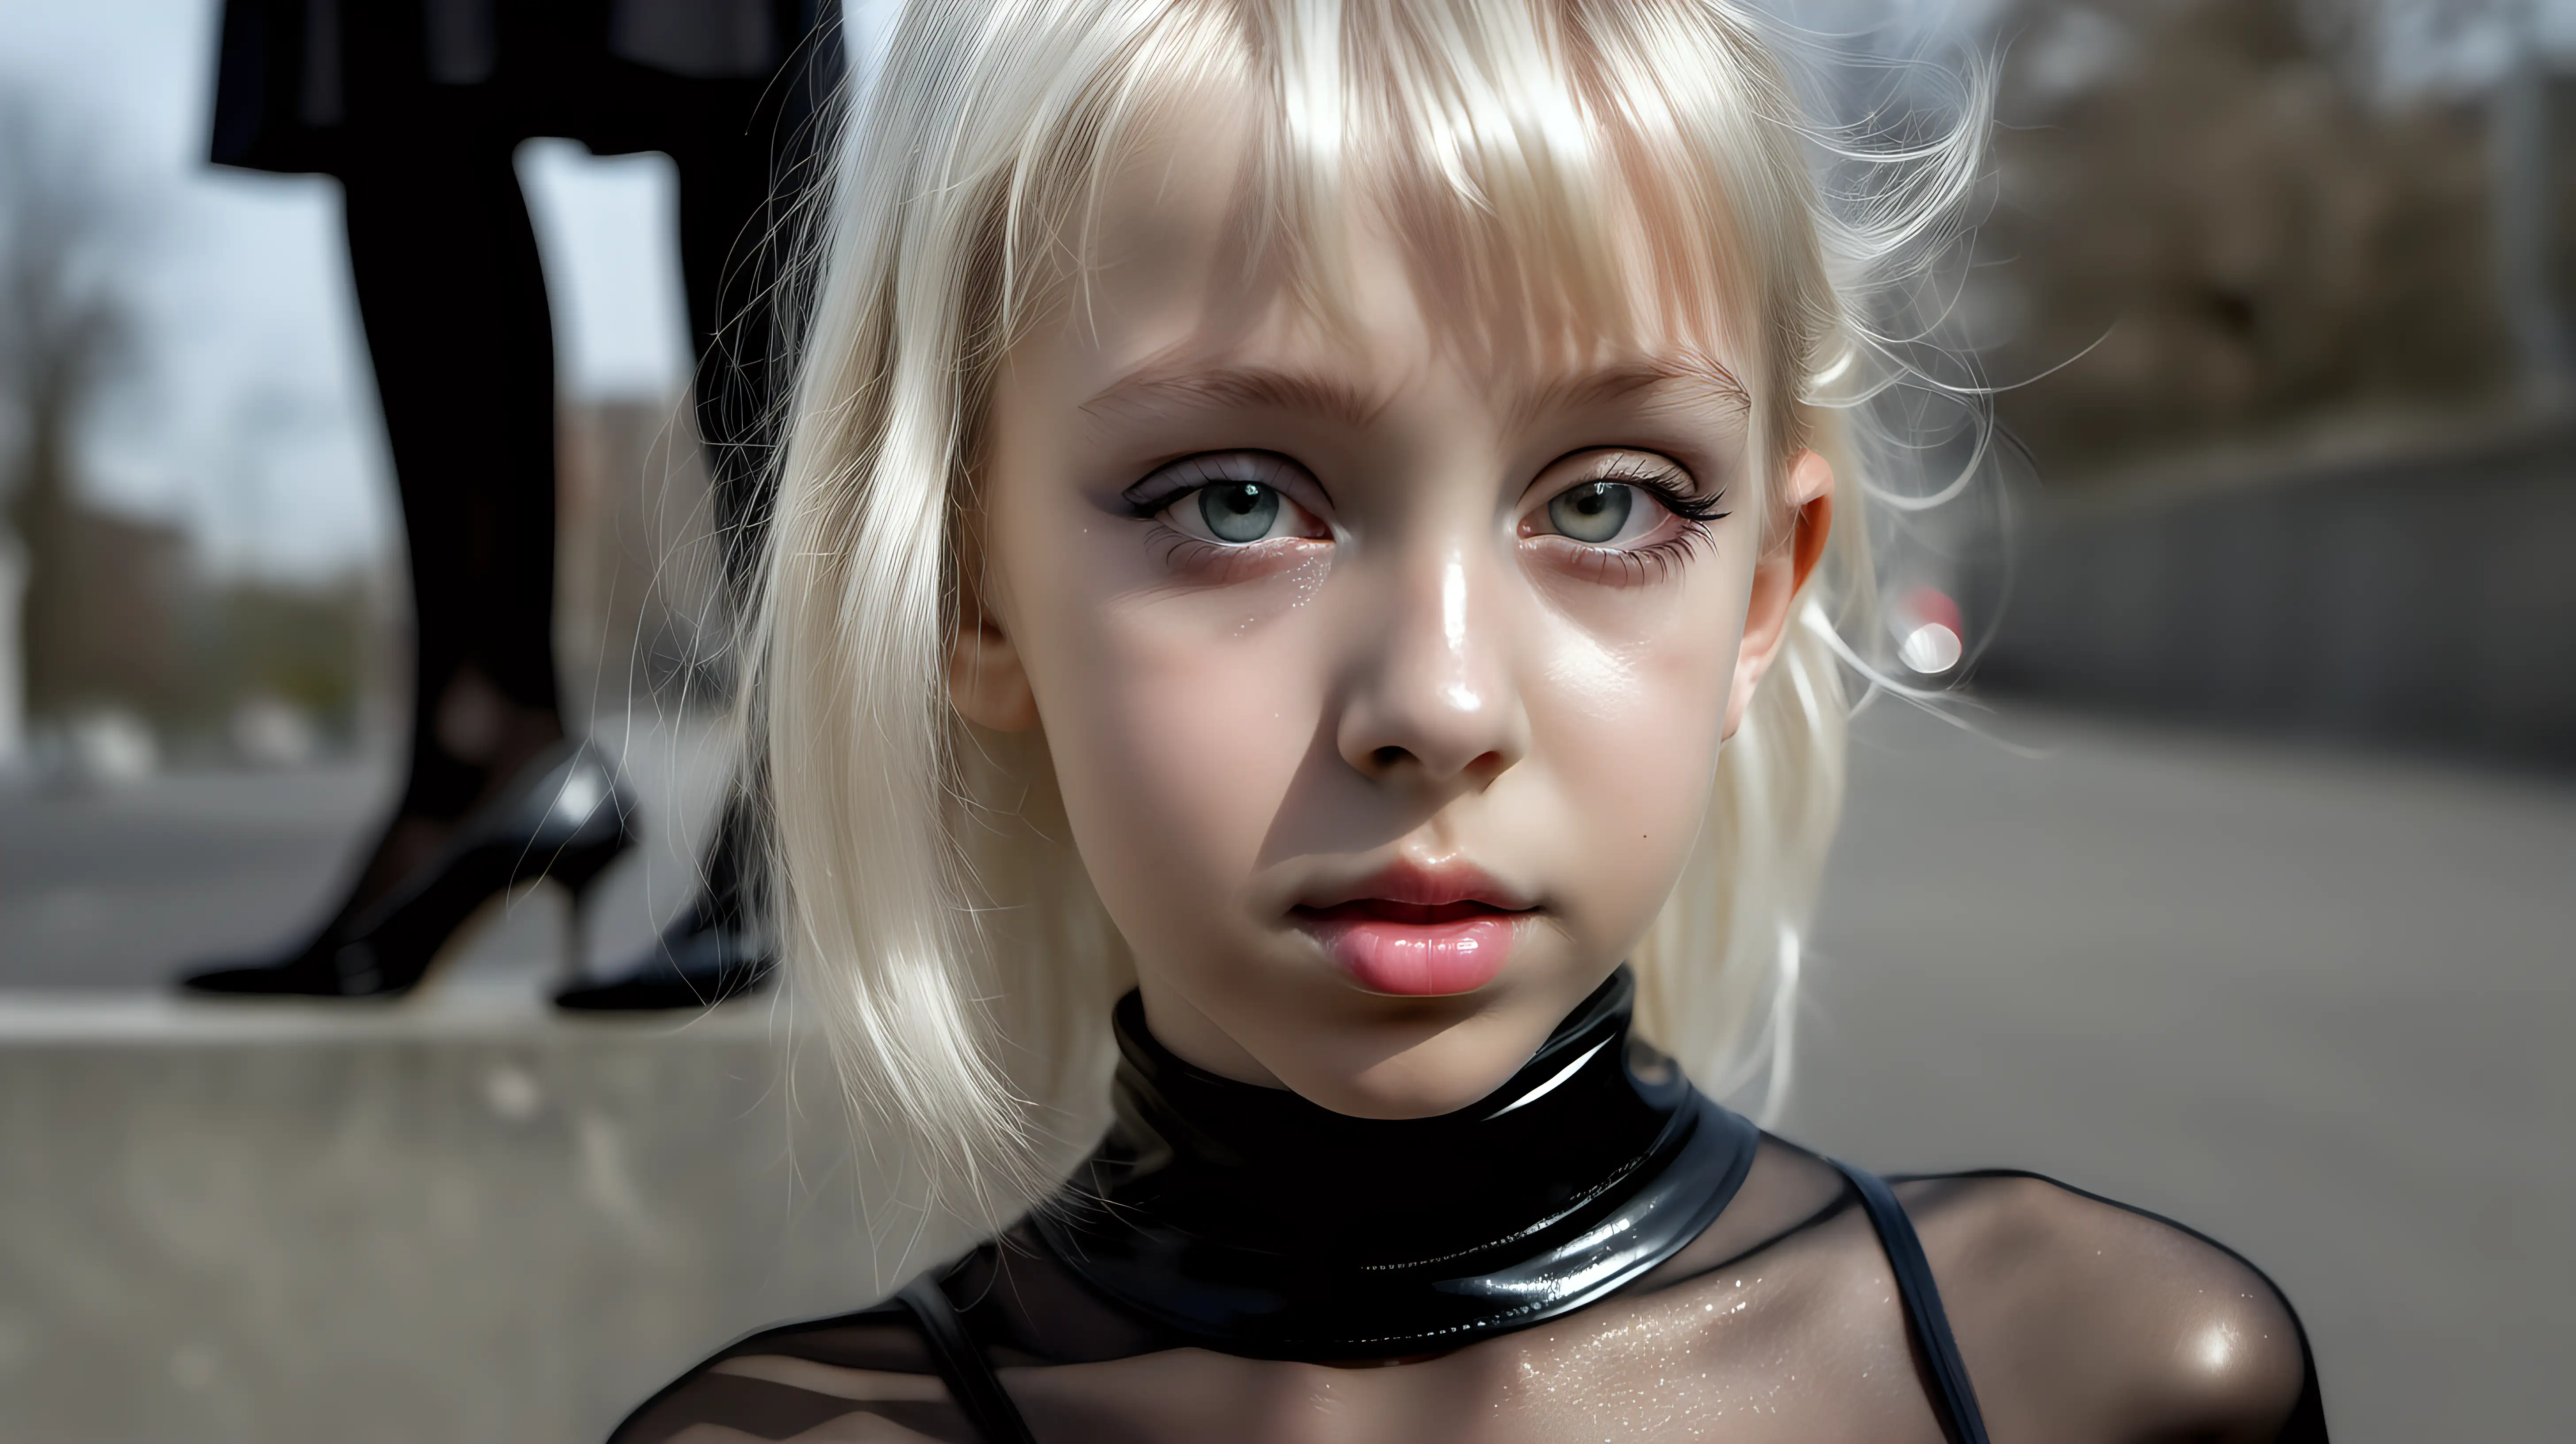 Gothic Little Blond Girl and Mother in Neonlit Street Portrait